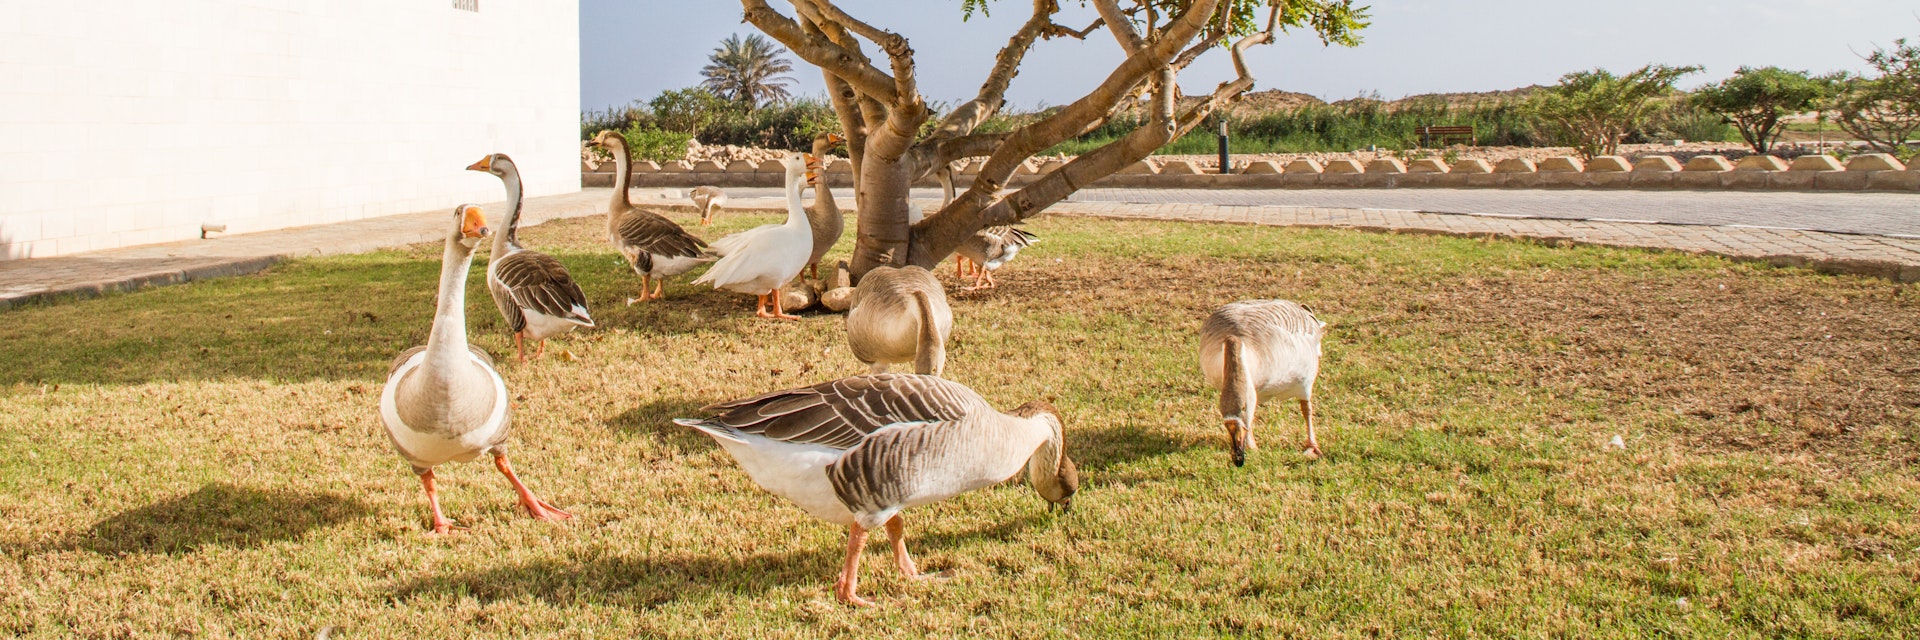 Frankincense tree at the Frankincense Museum with a group of geese under the tree. Salalah, Oman